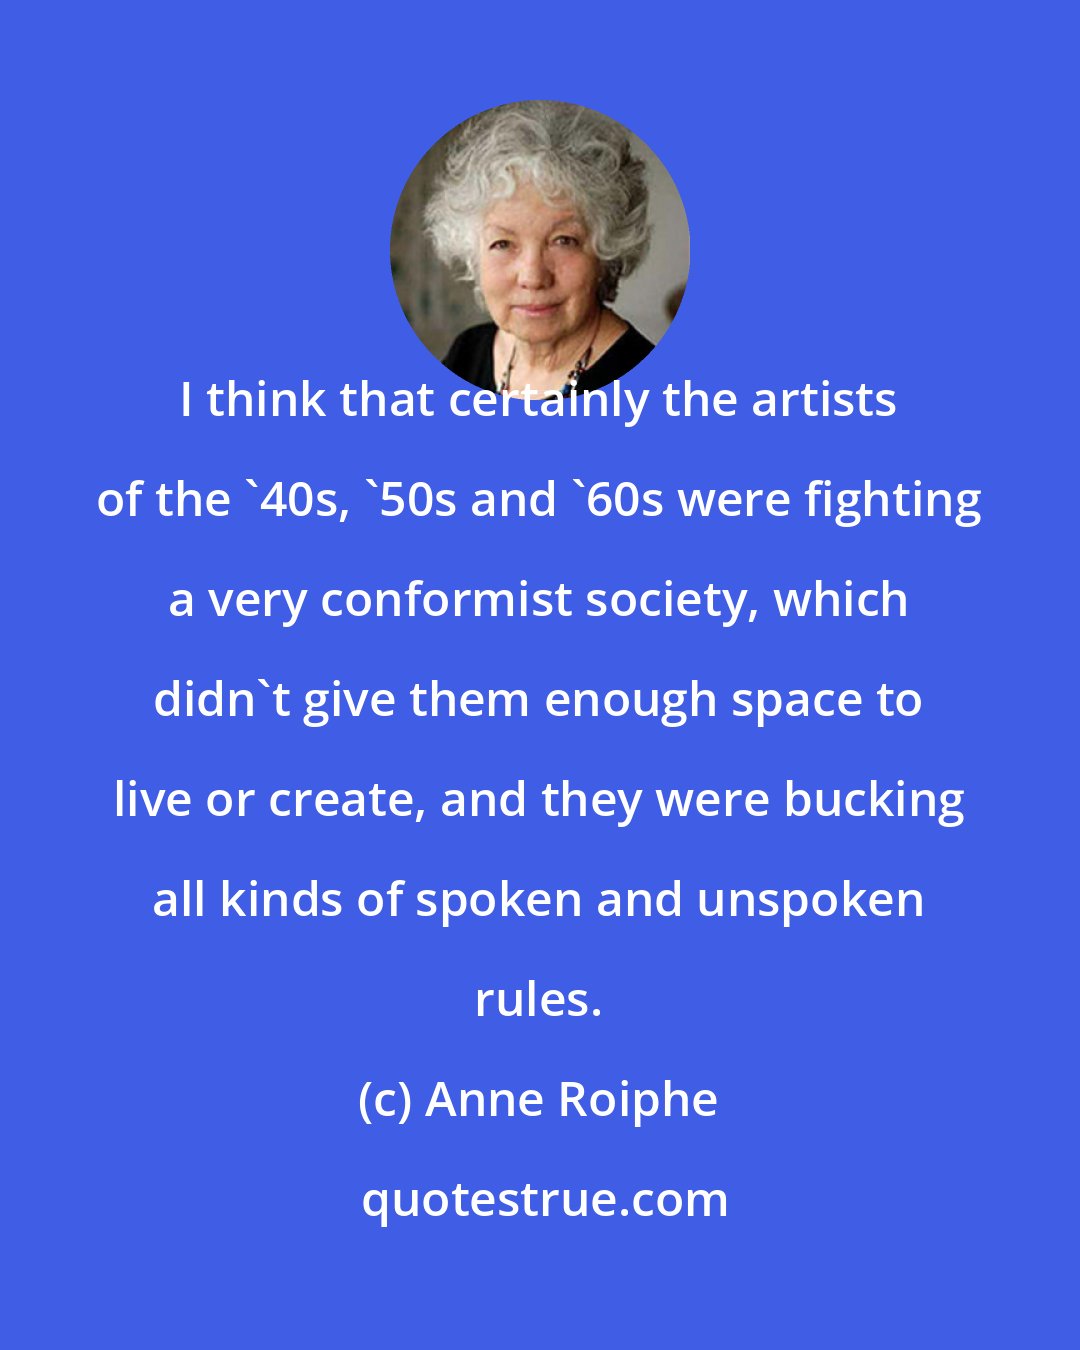 Anne Roiphe: I think that certainly the artists of the '40s, '50s and '60s were fighting a very conformist society, which didn't give them enough space to live or create, and they were bucking all kinds of spoken and unspoken rules.